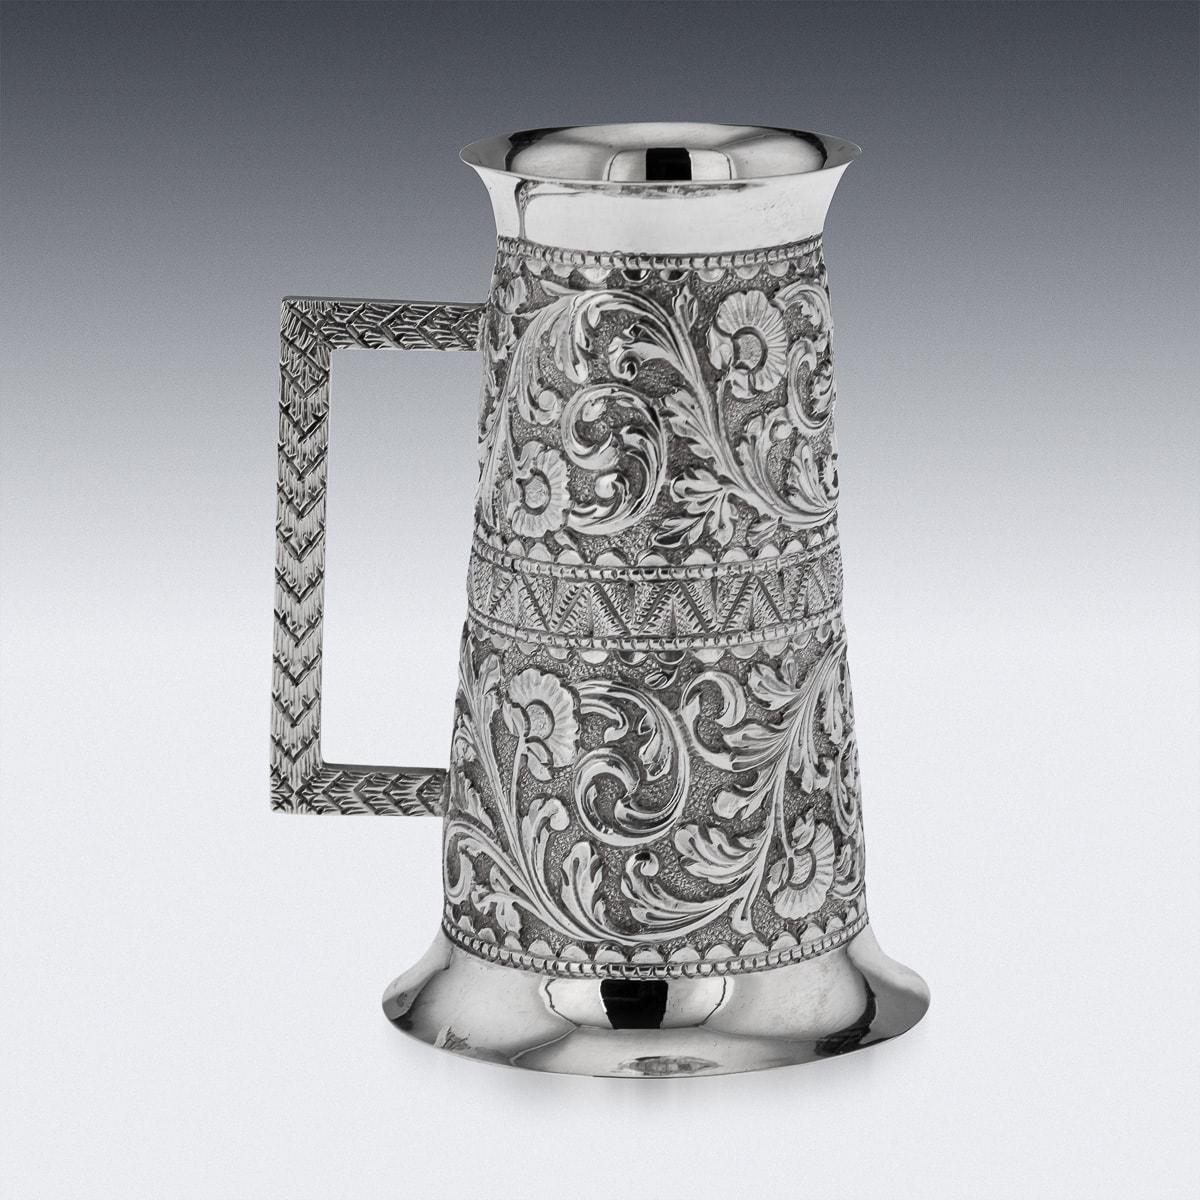 20th Century Edwardian Solid Silver Spirit Measure Cup, London, c.1901 In Good Condition For Sale In Royal Tunbridge Wells, Kent